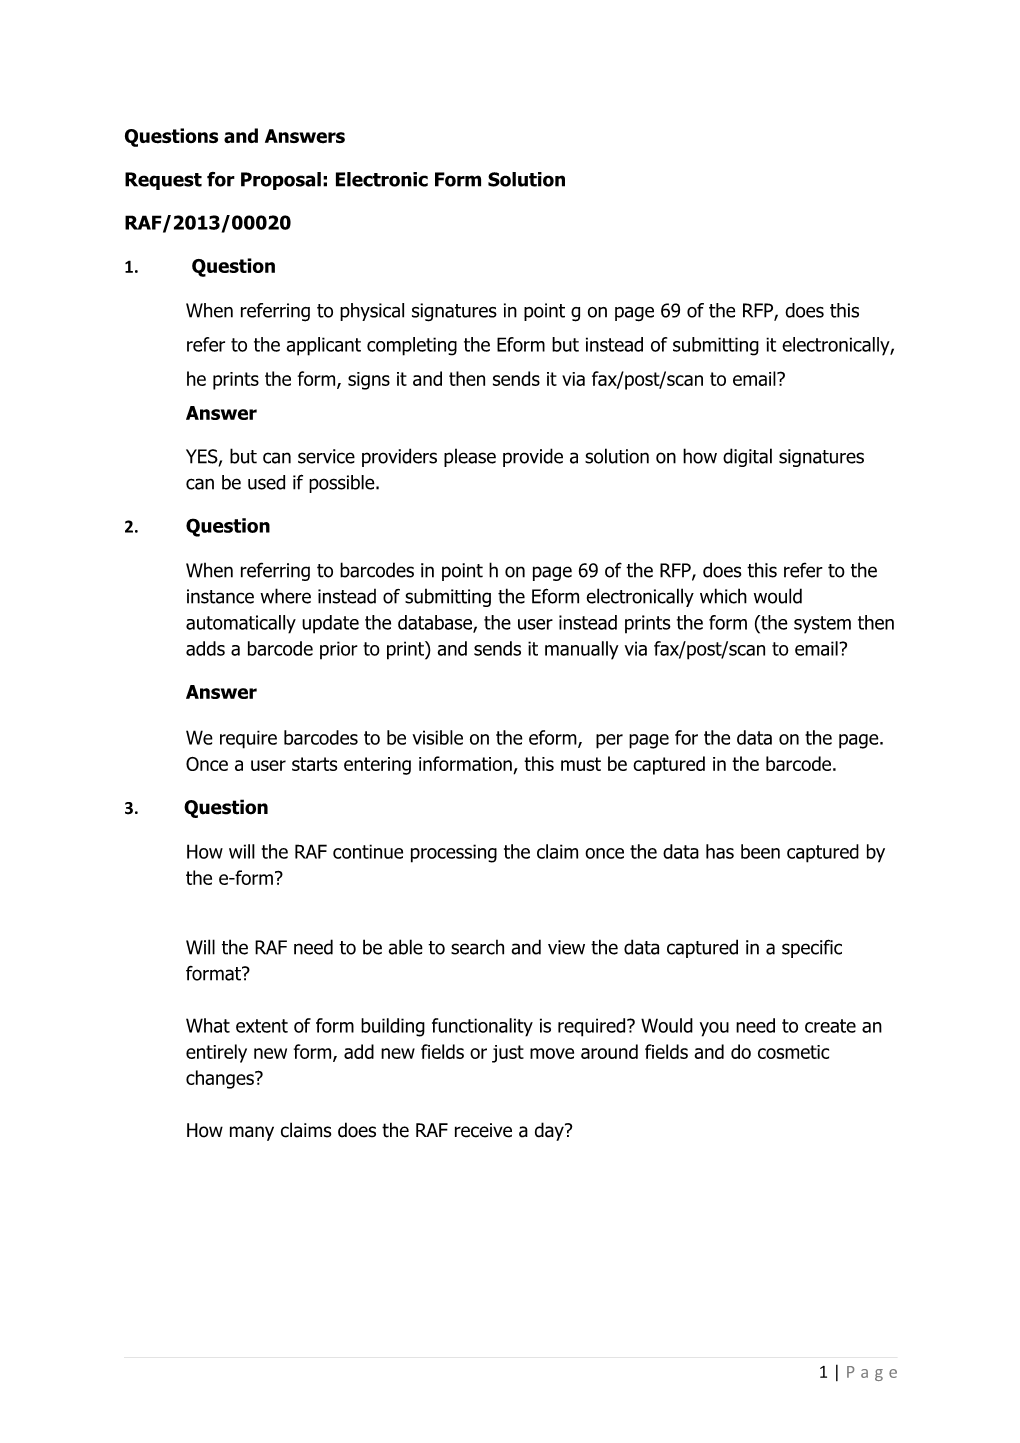 Questions and Answers EFORM PROPOSAL RAF201300020 Website